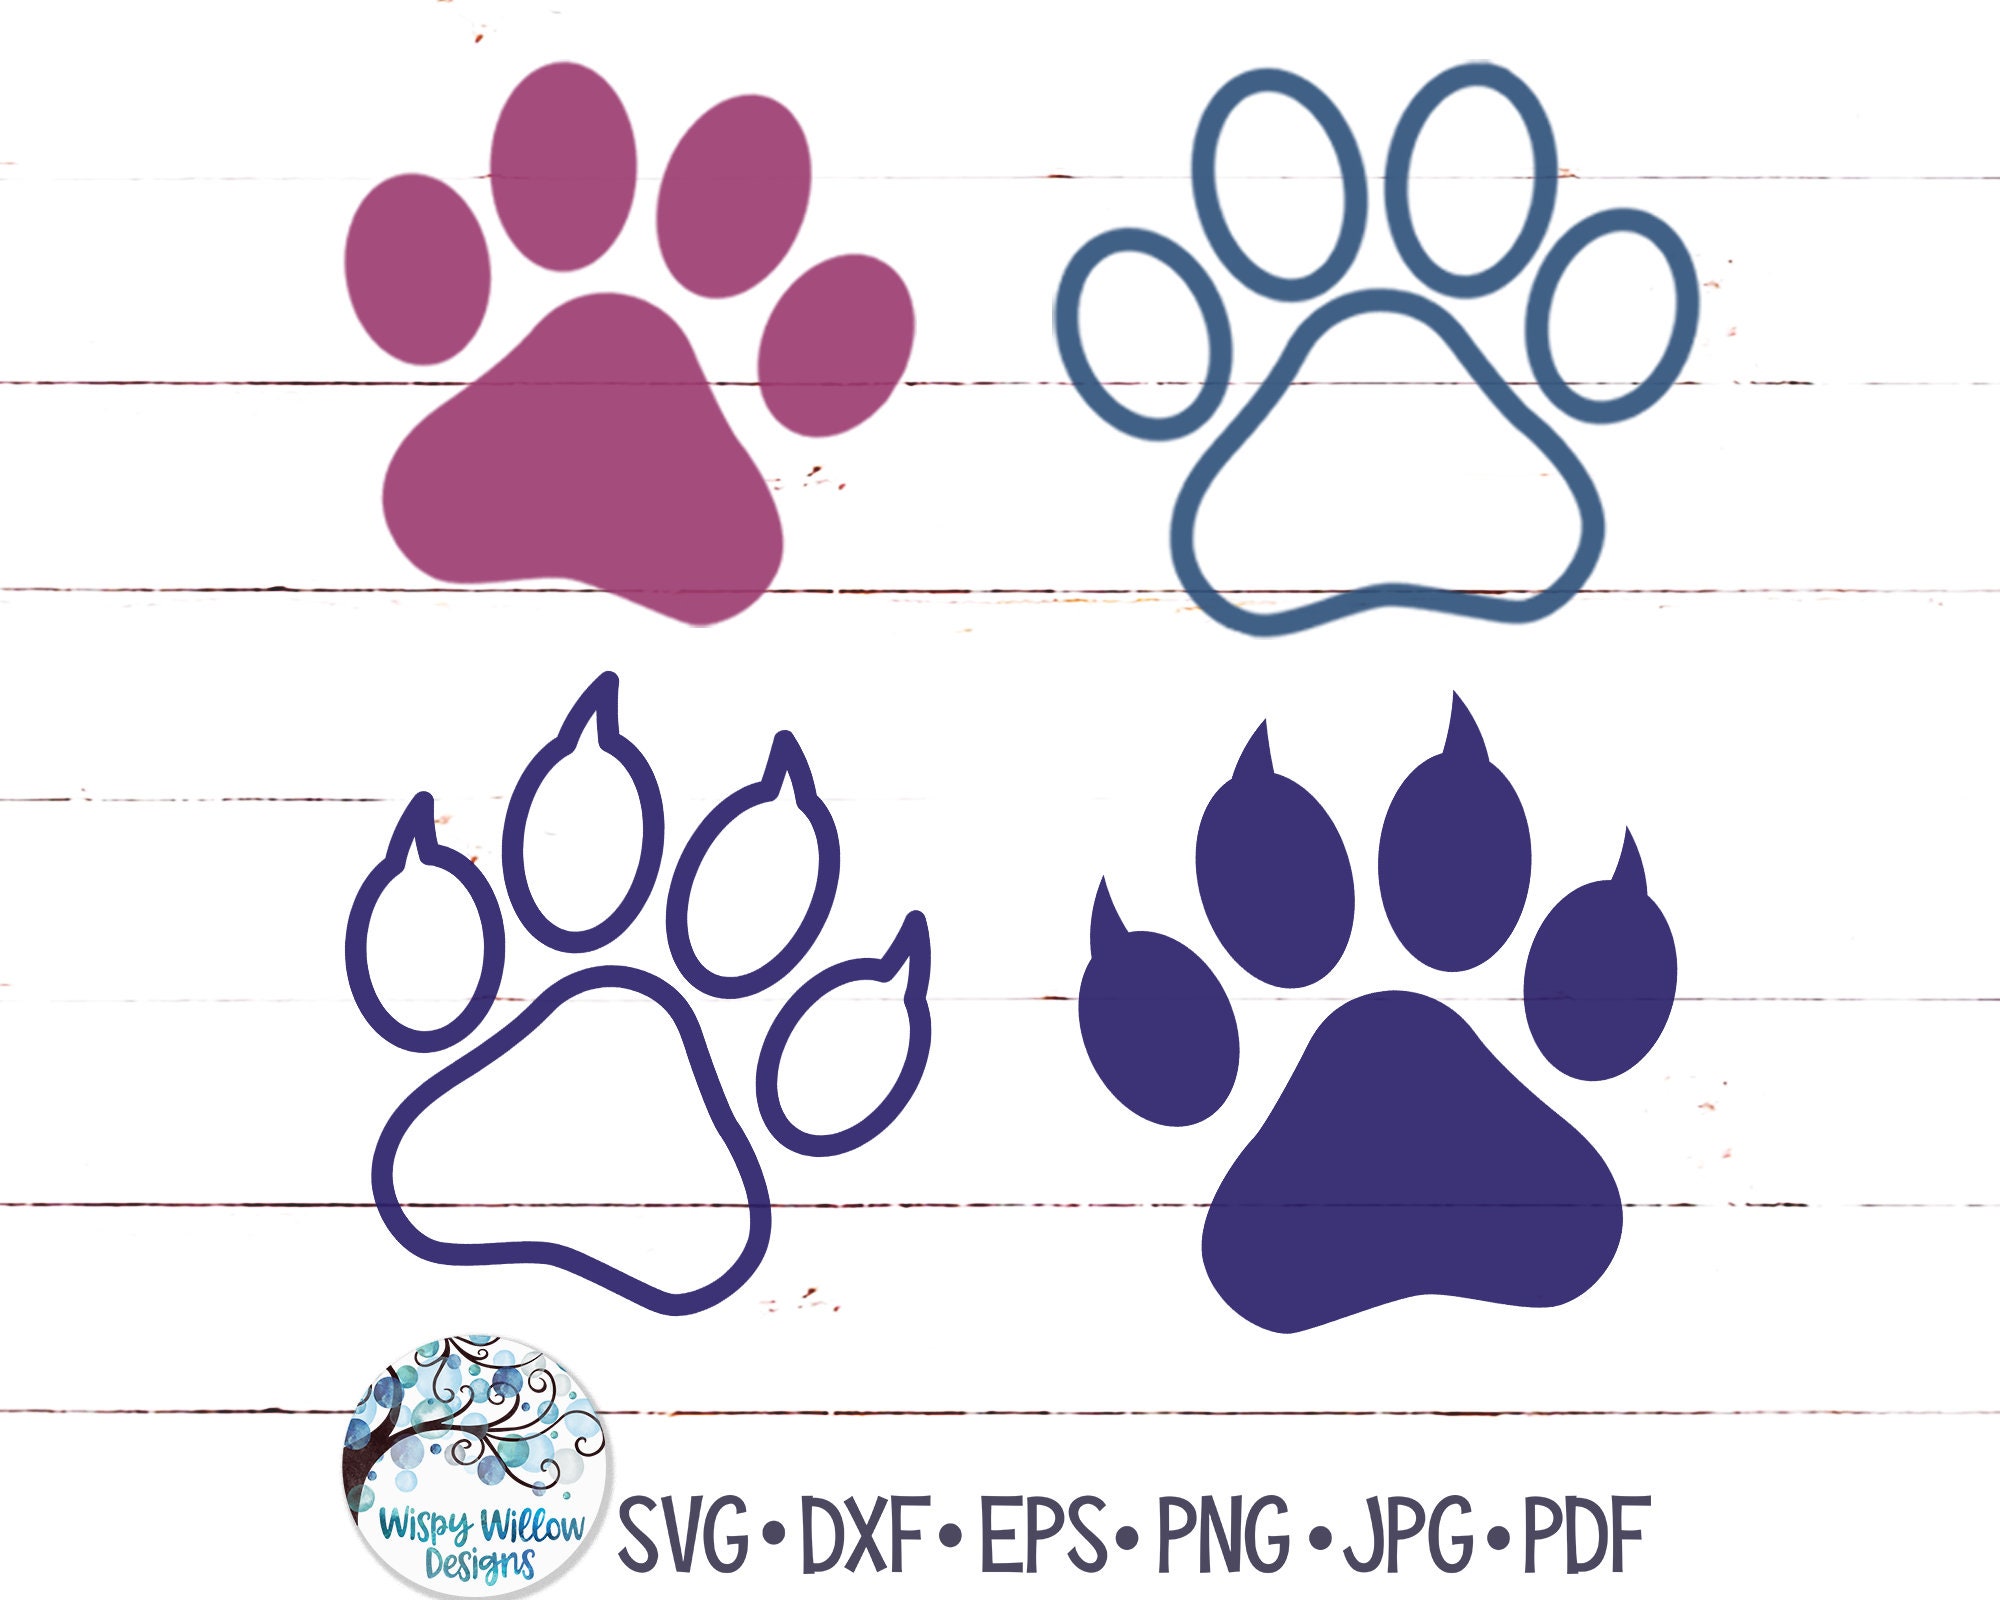 Ripped Silhouette Transparent Background, Rip Stone, Paw, Rip Vector, Paw  Vector PNG Image For Free Download